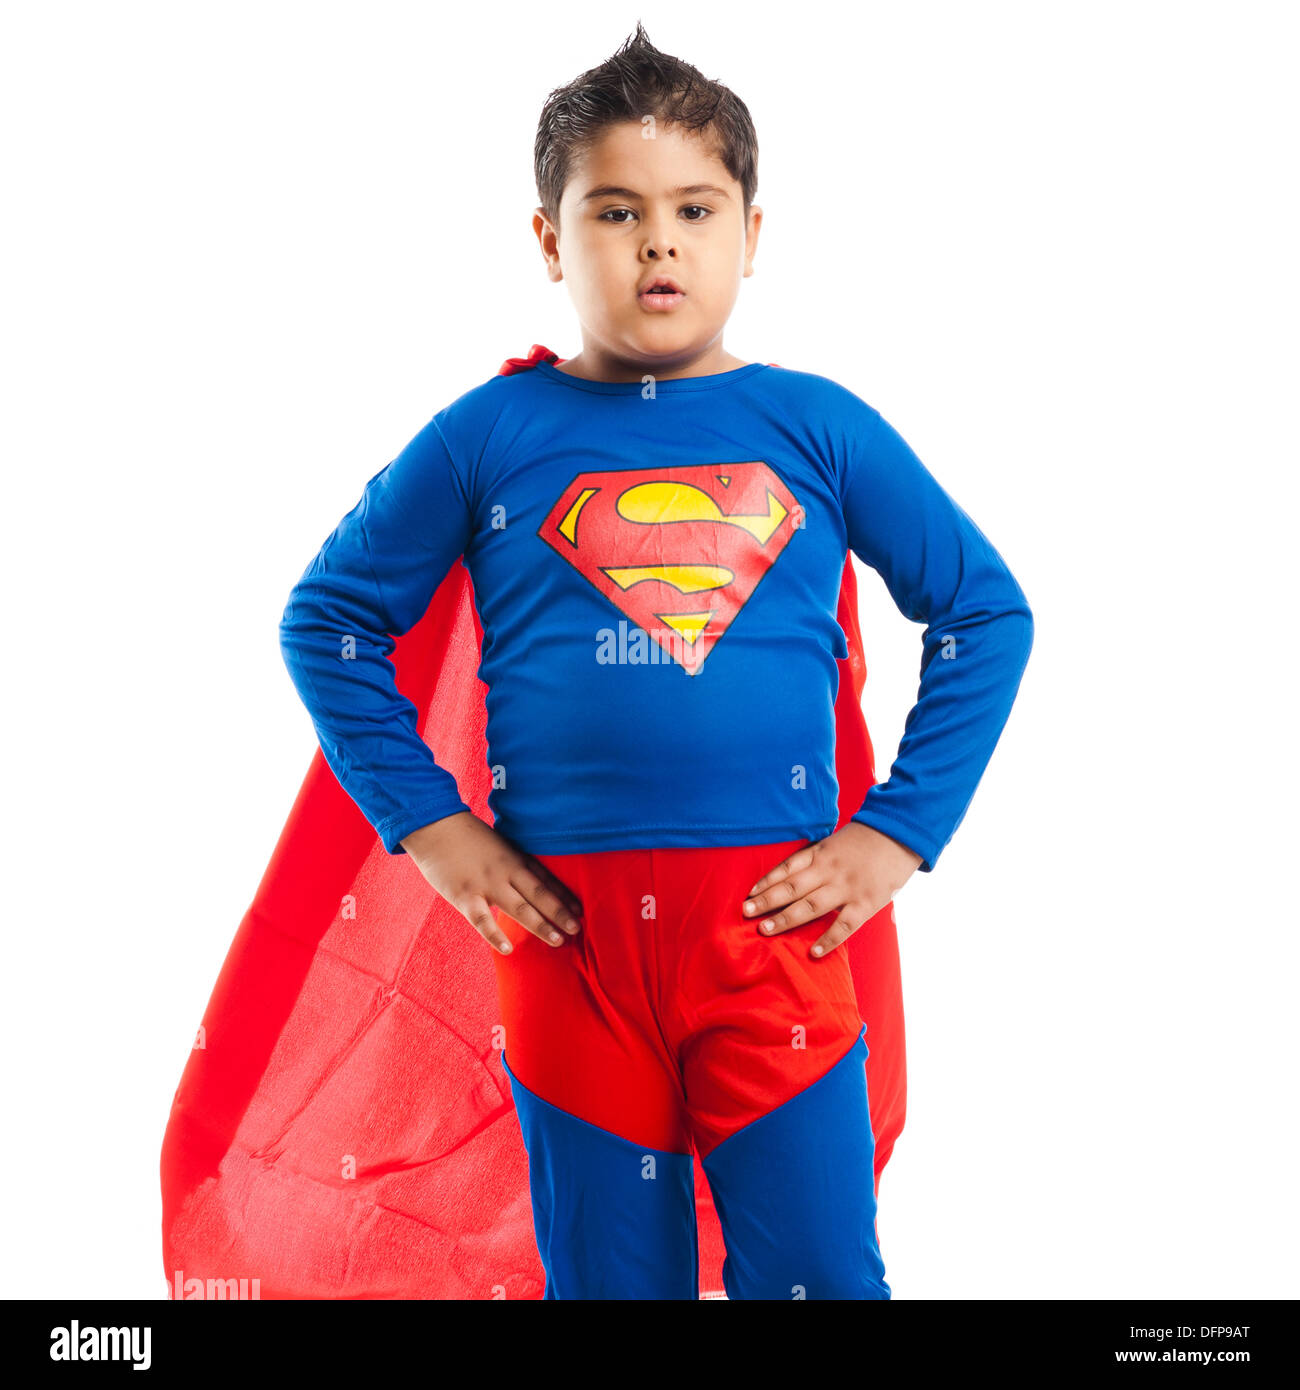 Boy dressed as a superman standing with his arm akimbo Stock Photo